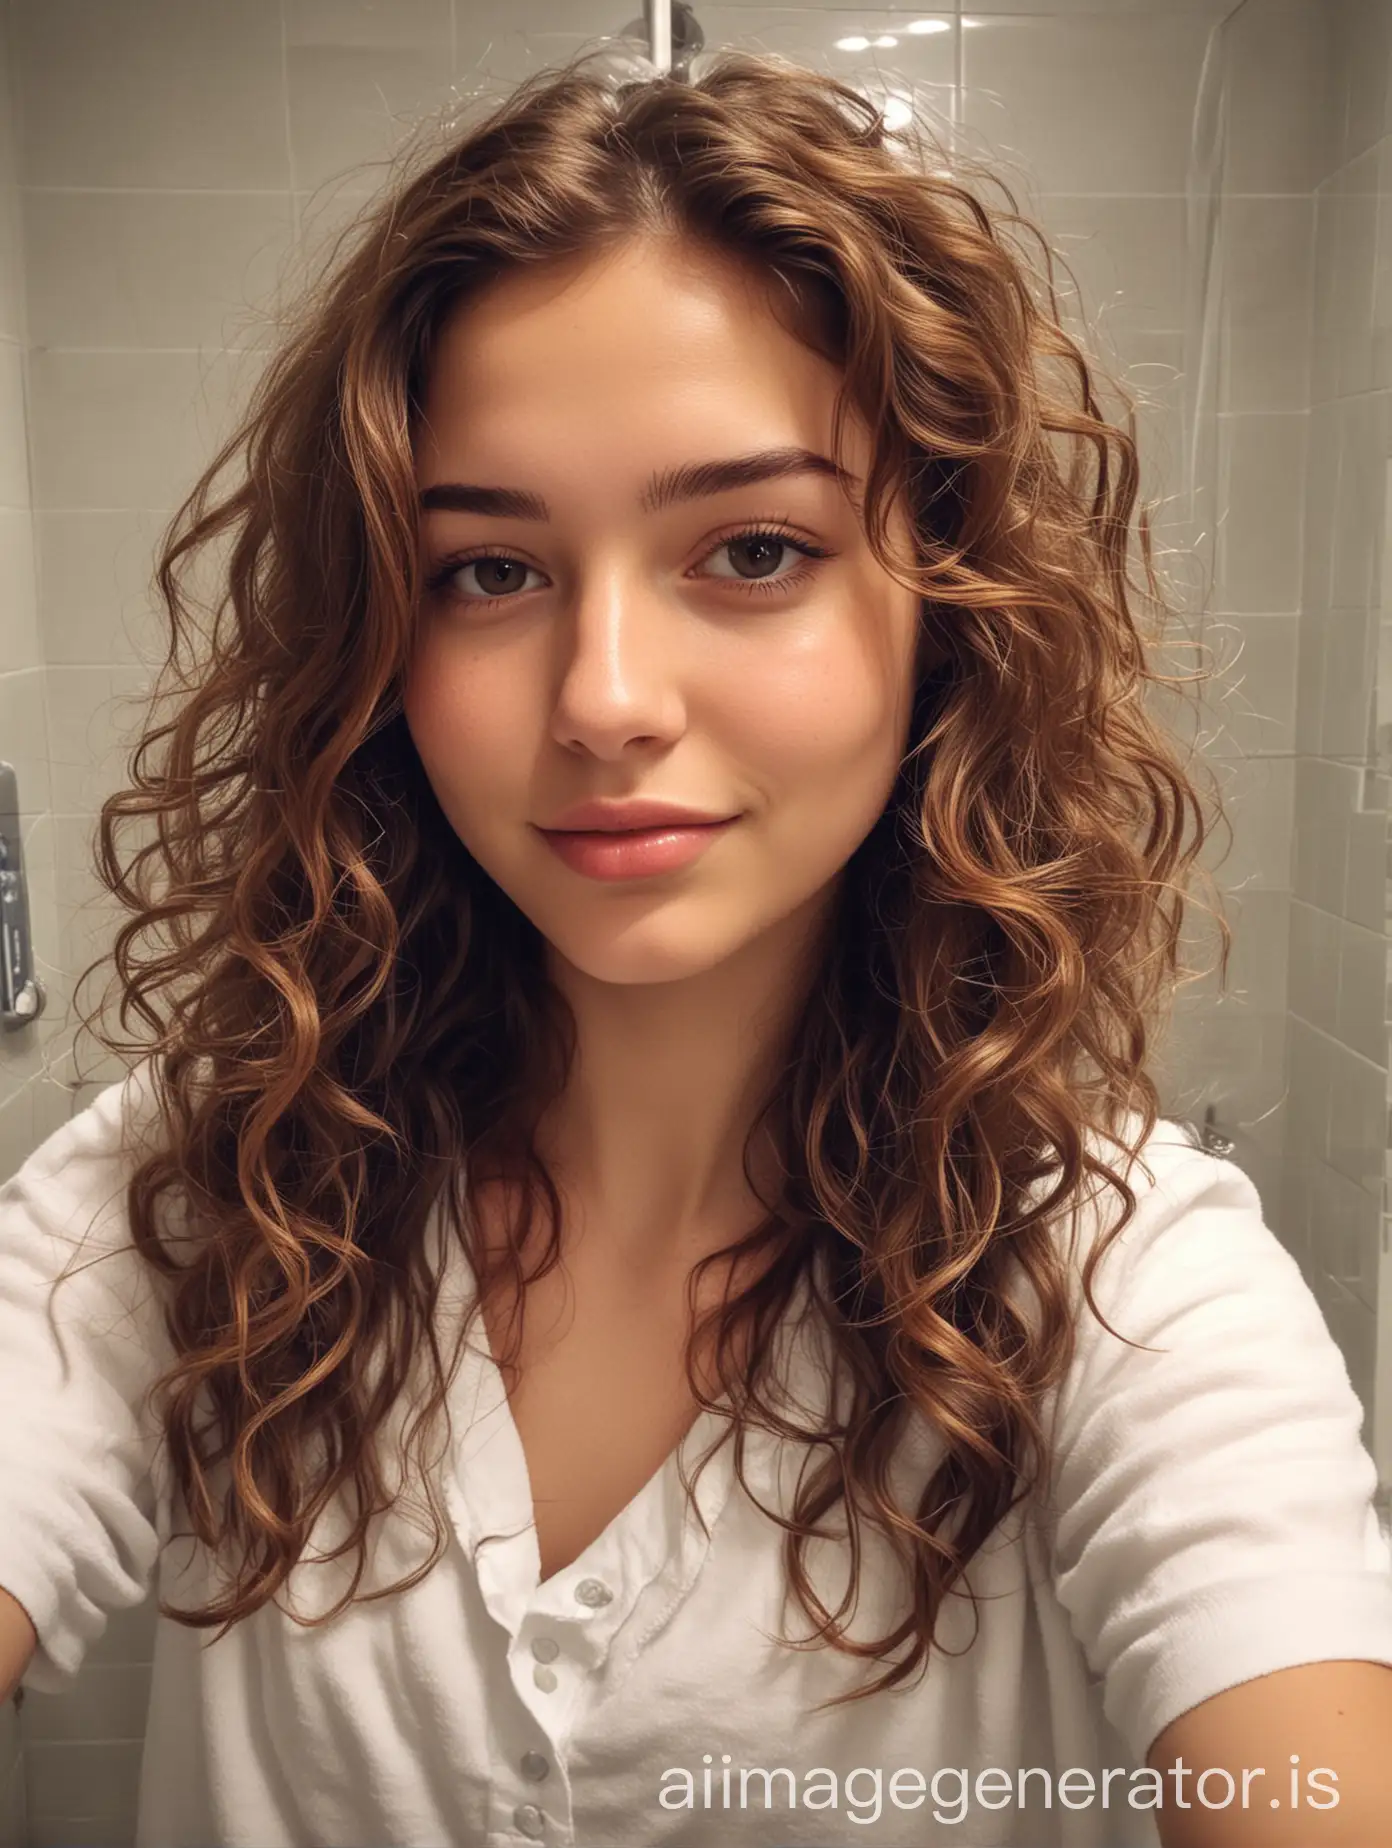 Young-Woman-with-Brown-Wavy-Hair-Taking-SelfPortrait-in-Bathroom